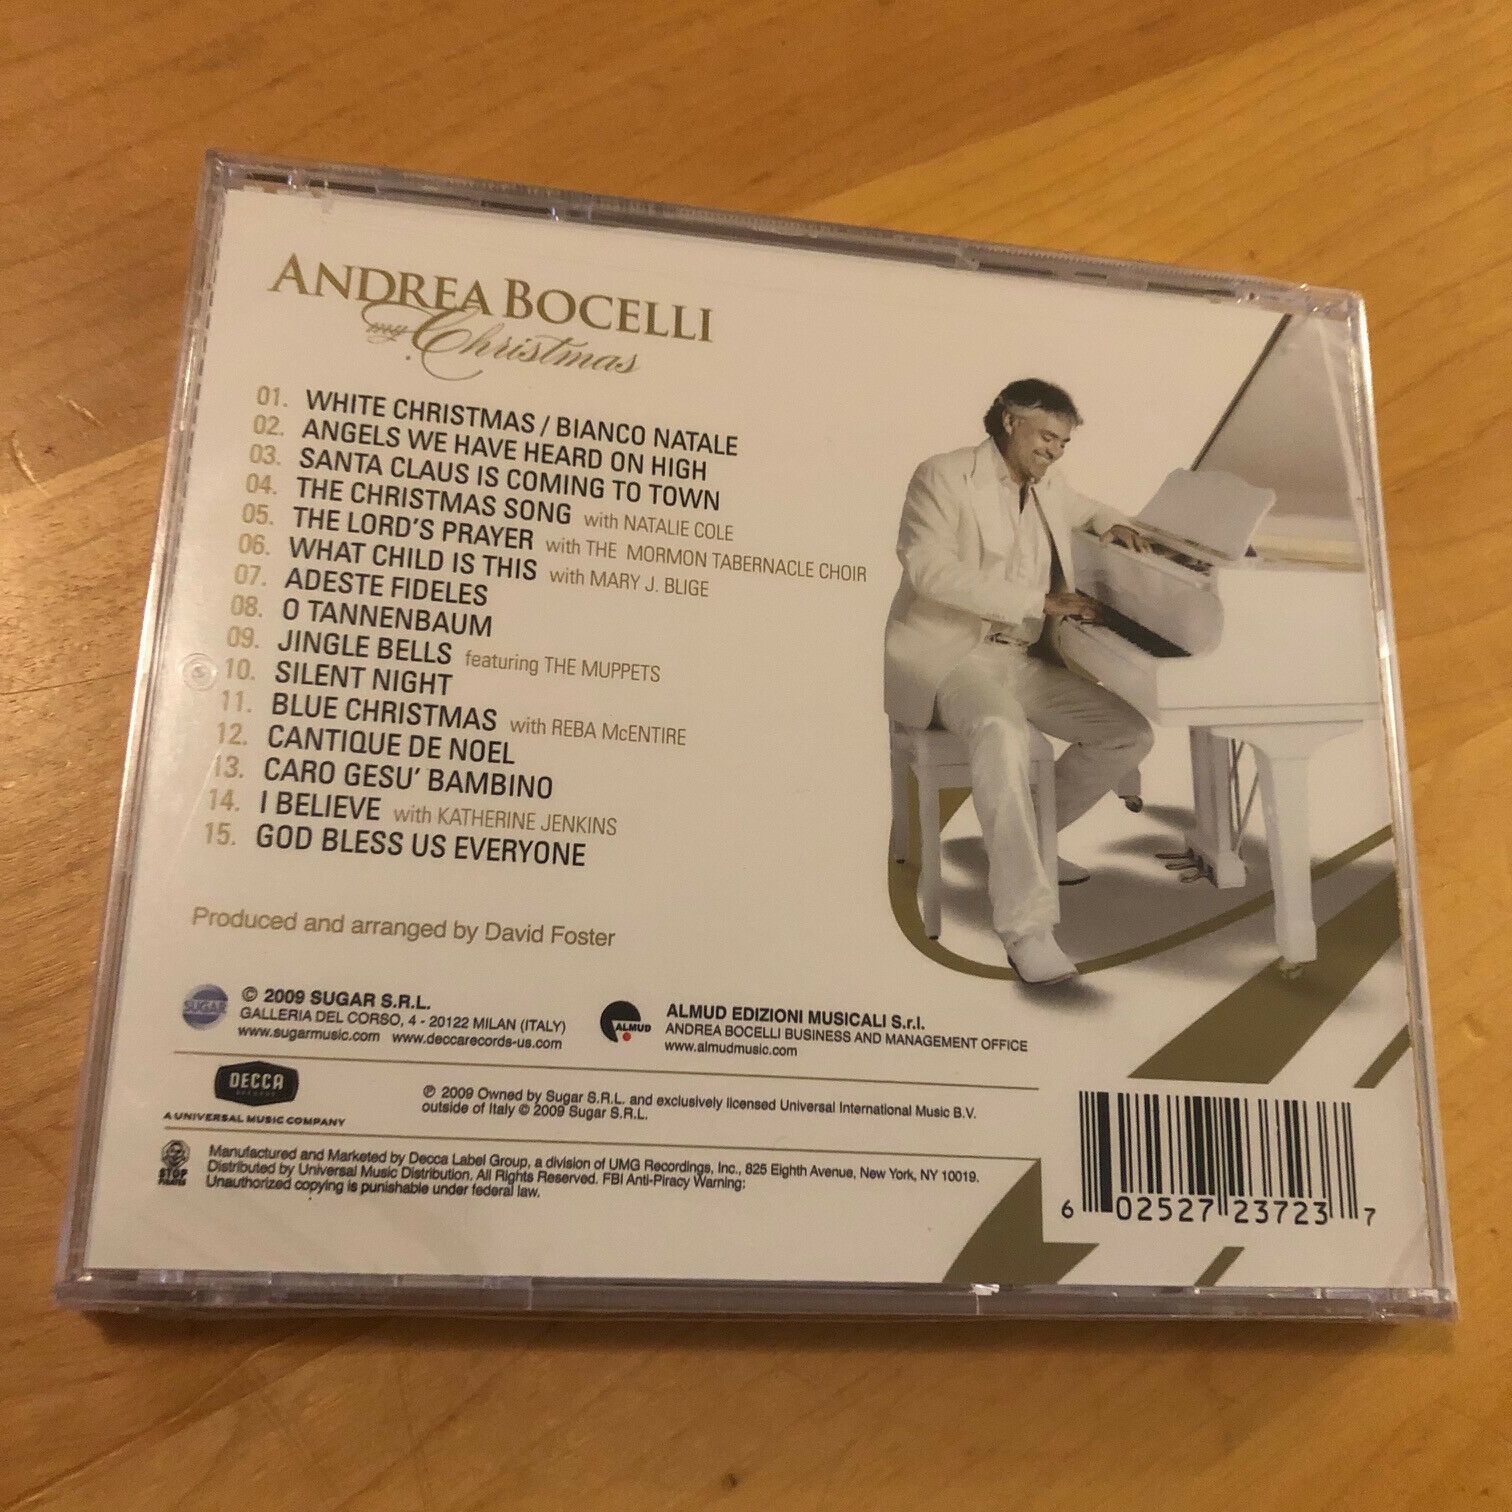 ANDREA BOCELLI My Christmas CD is BRAND NEW - CDs